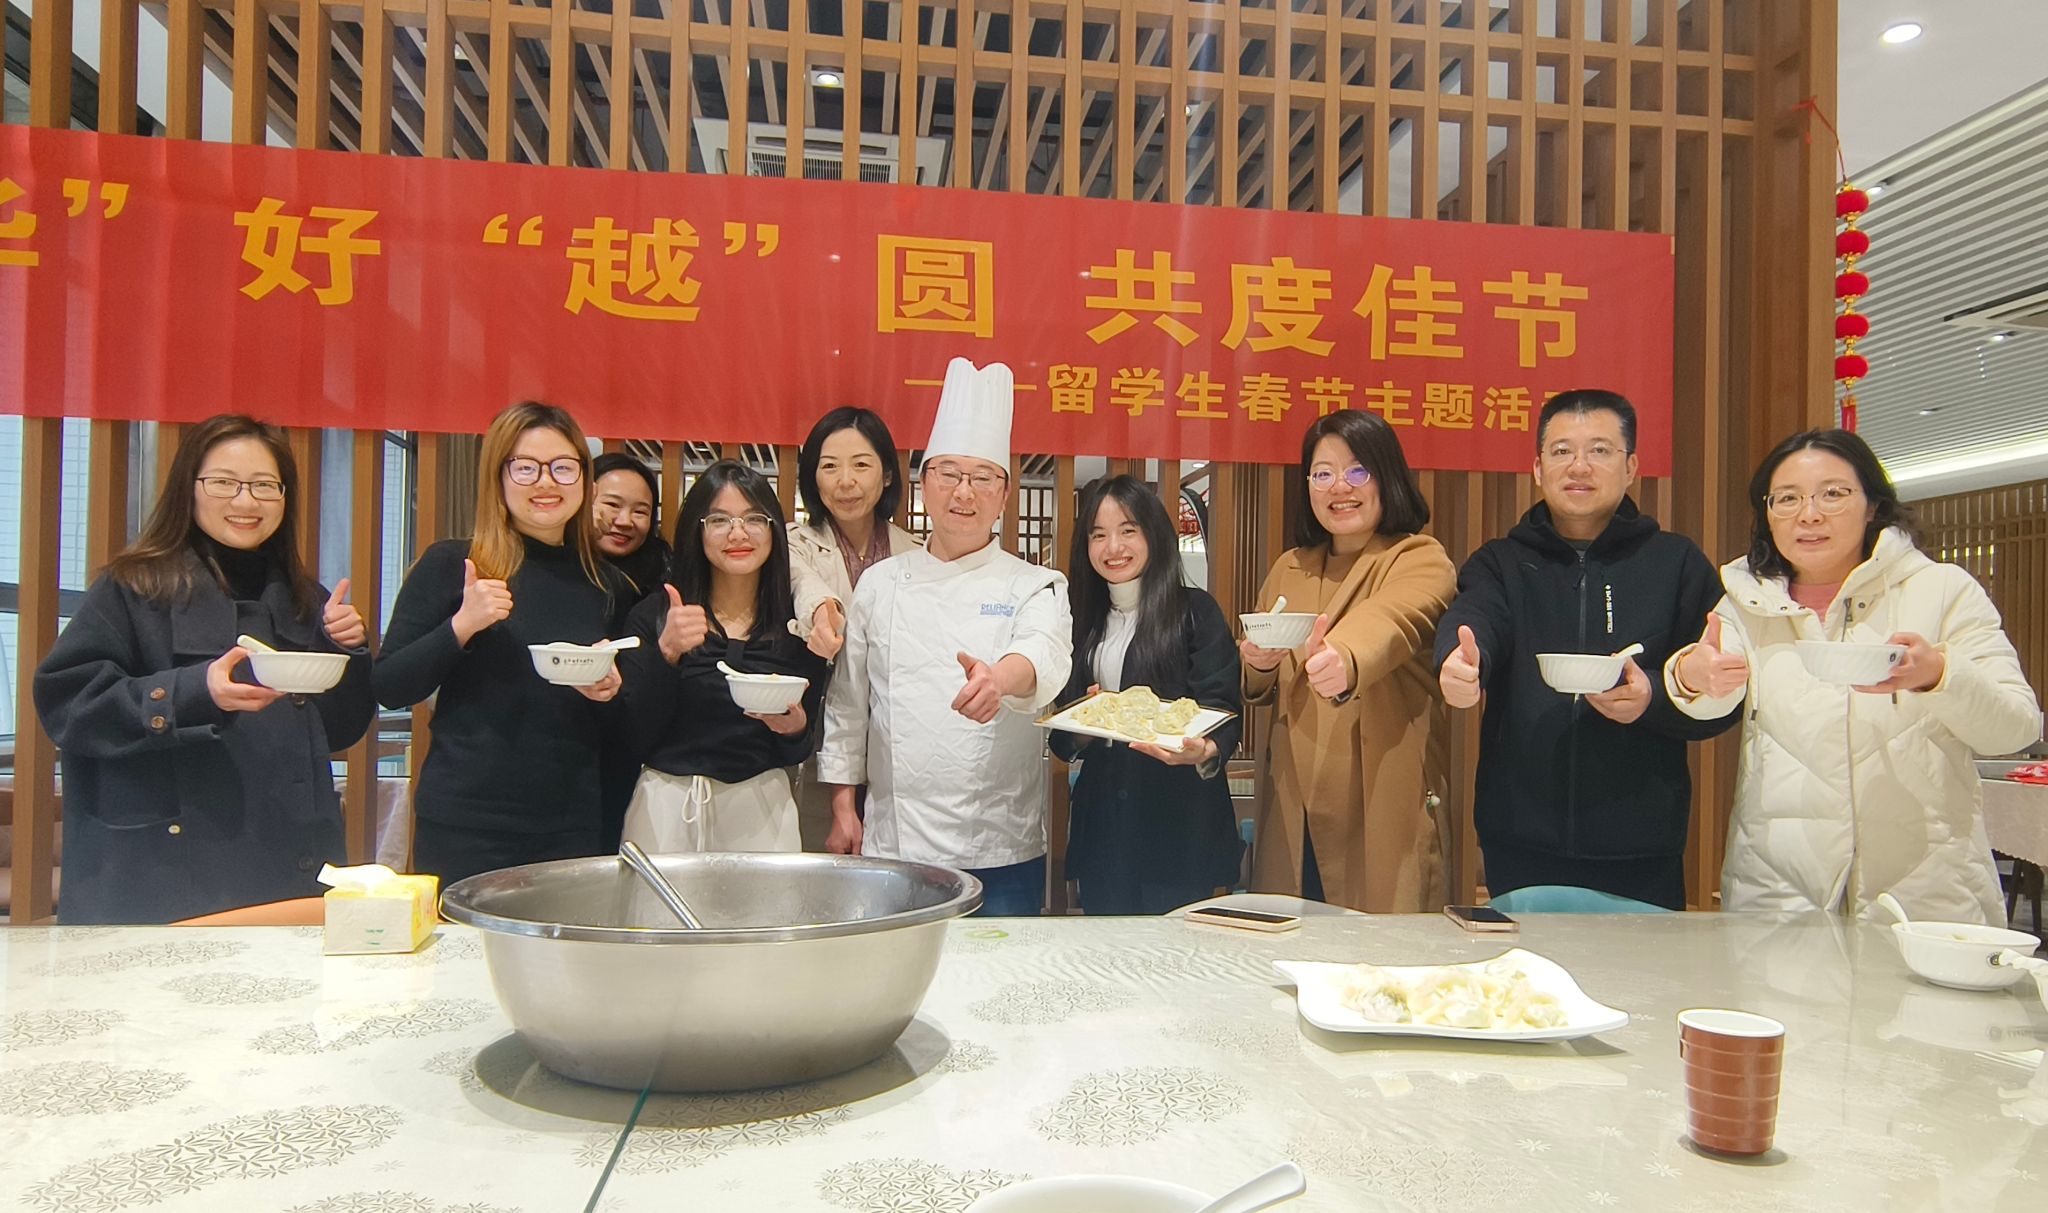 JXVTC Teachers and Vietnam Students Celebrated the Chinese New Year